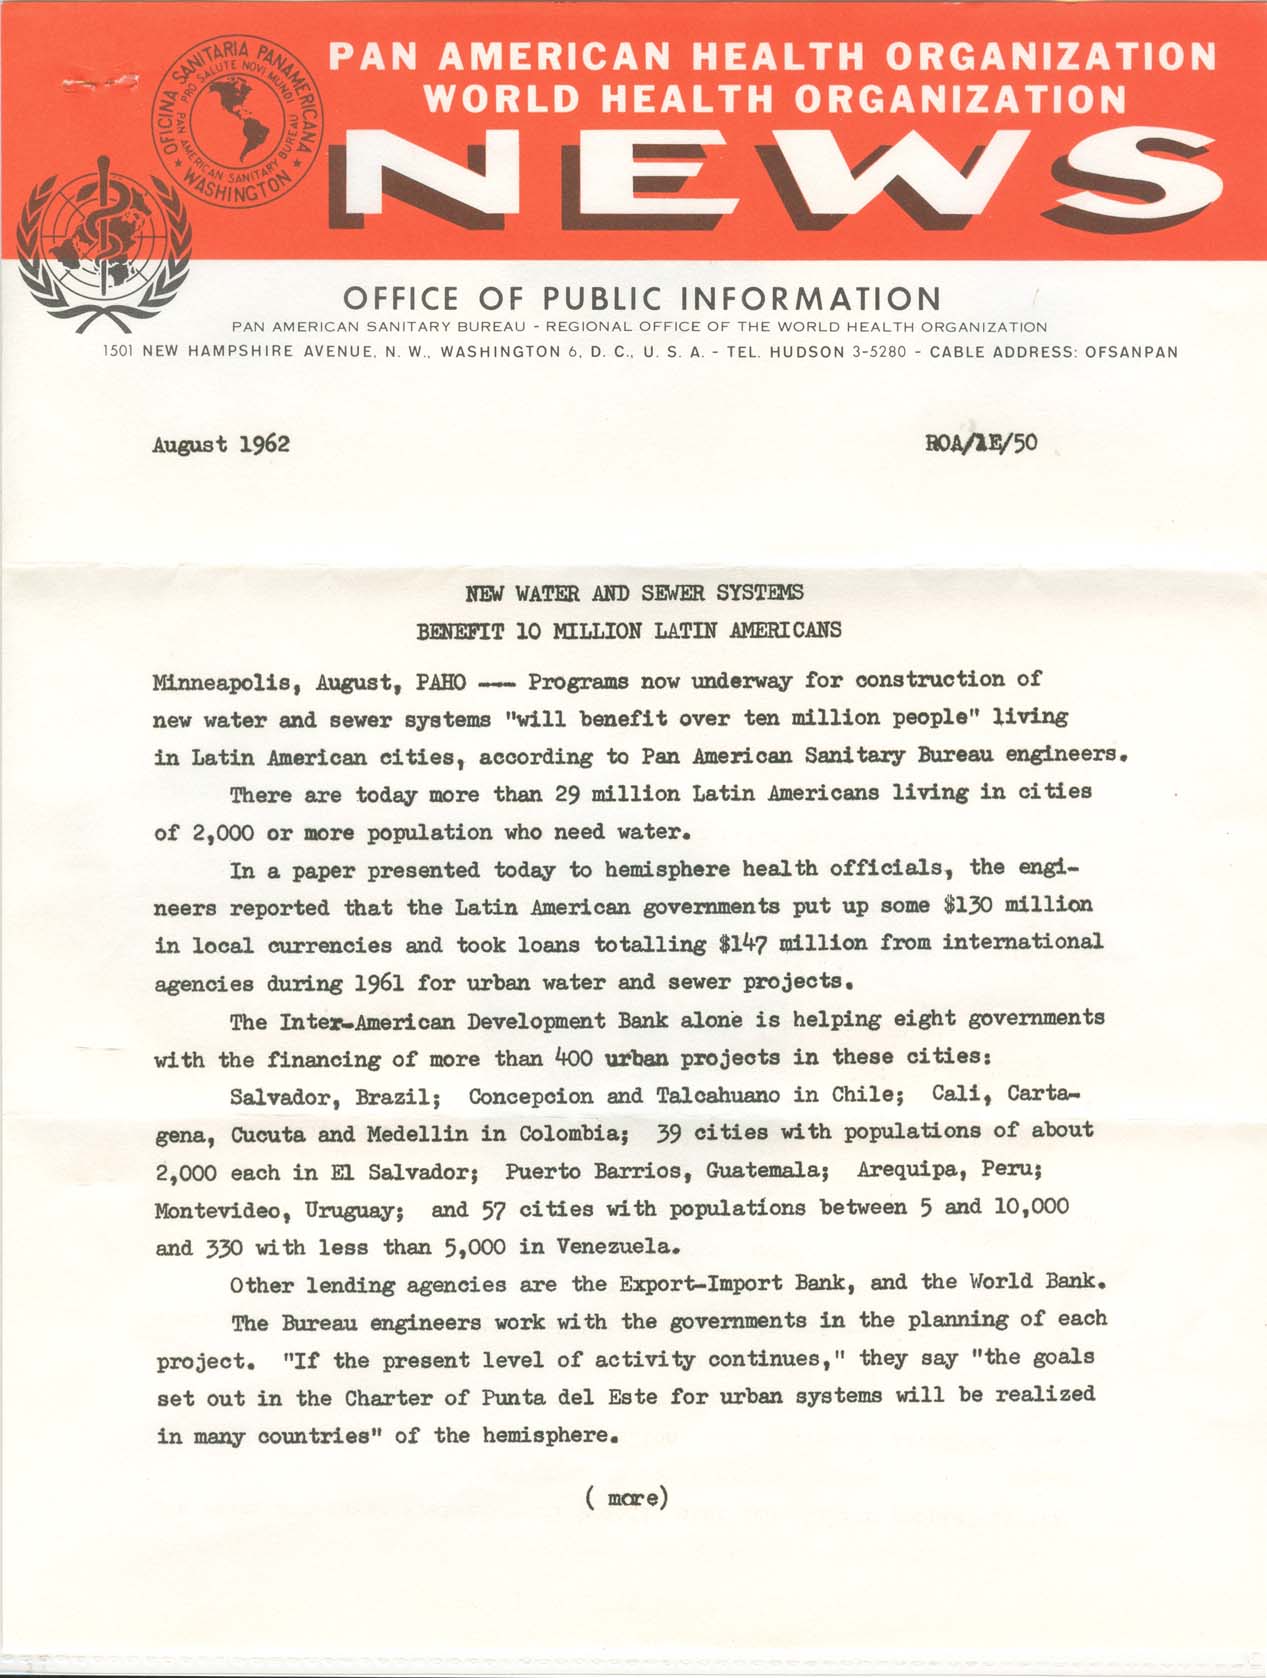 PAHO August 27th, 1962 "Received unsealed at New Orleans, La." - Contents - Page 1